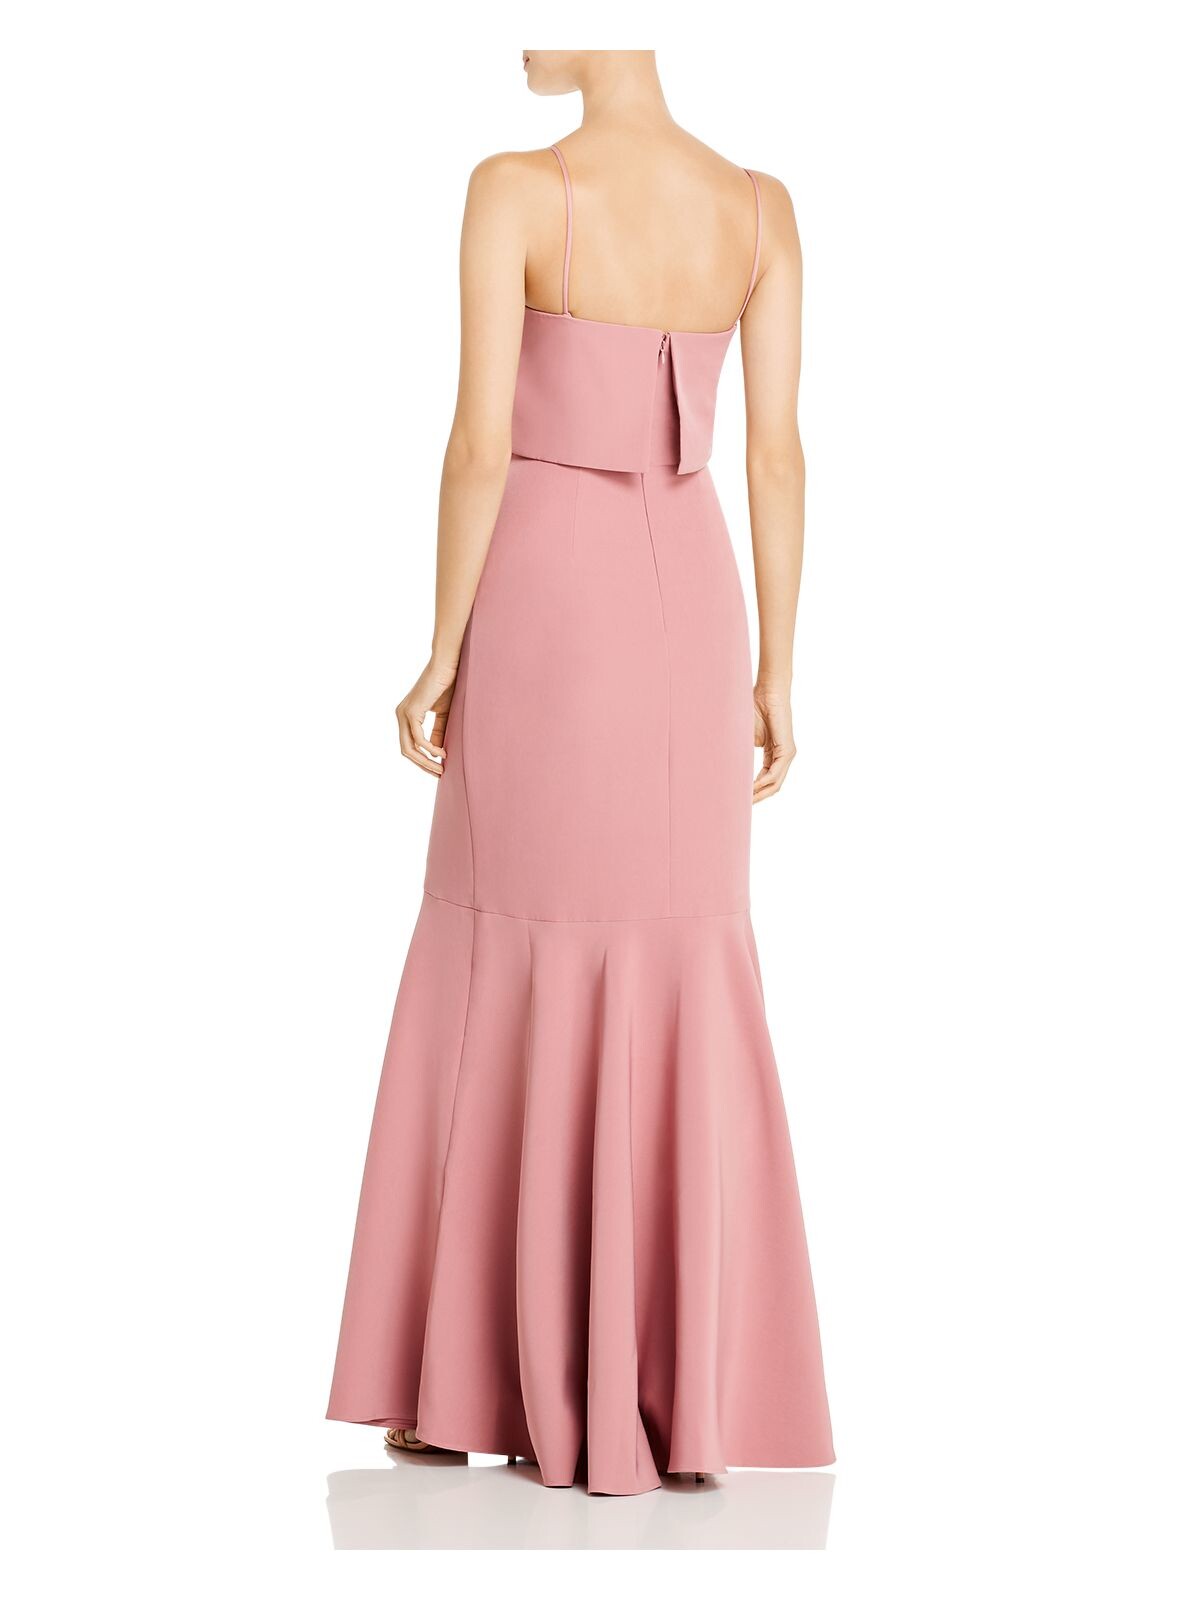 WAYF Womens Pink Sleeveless Square Neck Full-Length Cocktail Gown Dress XS